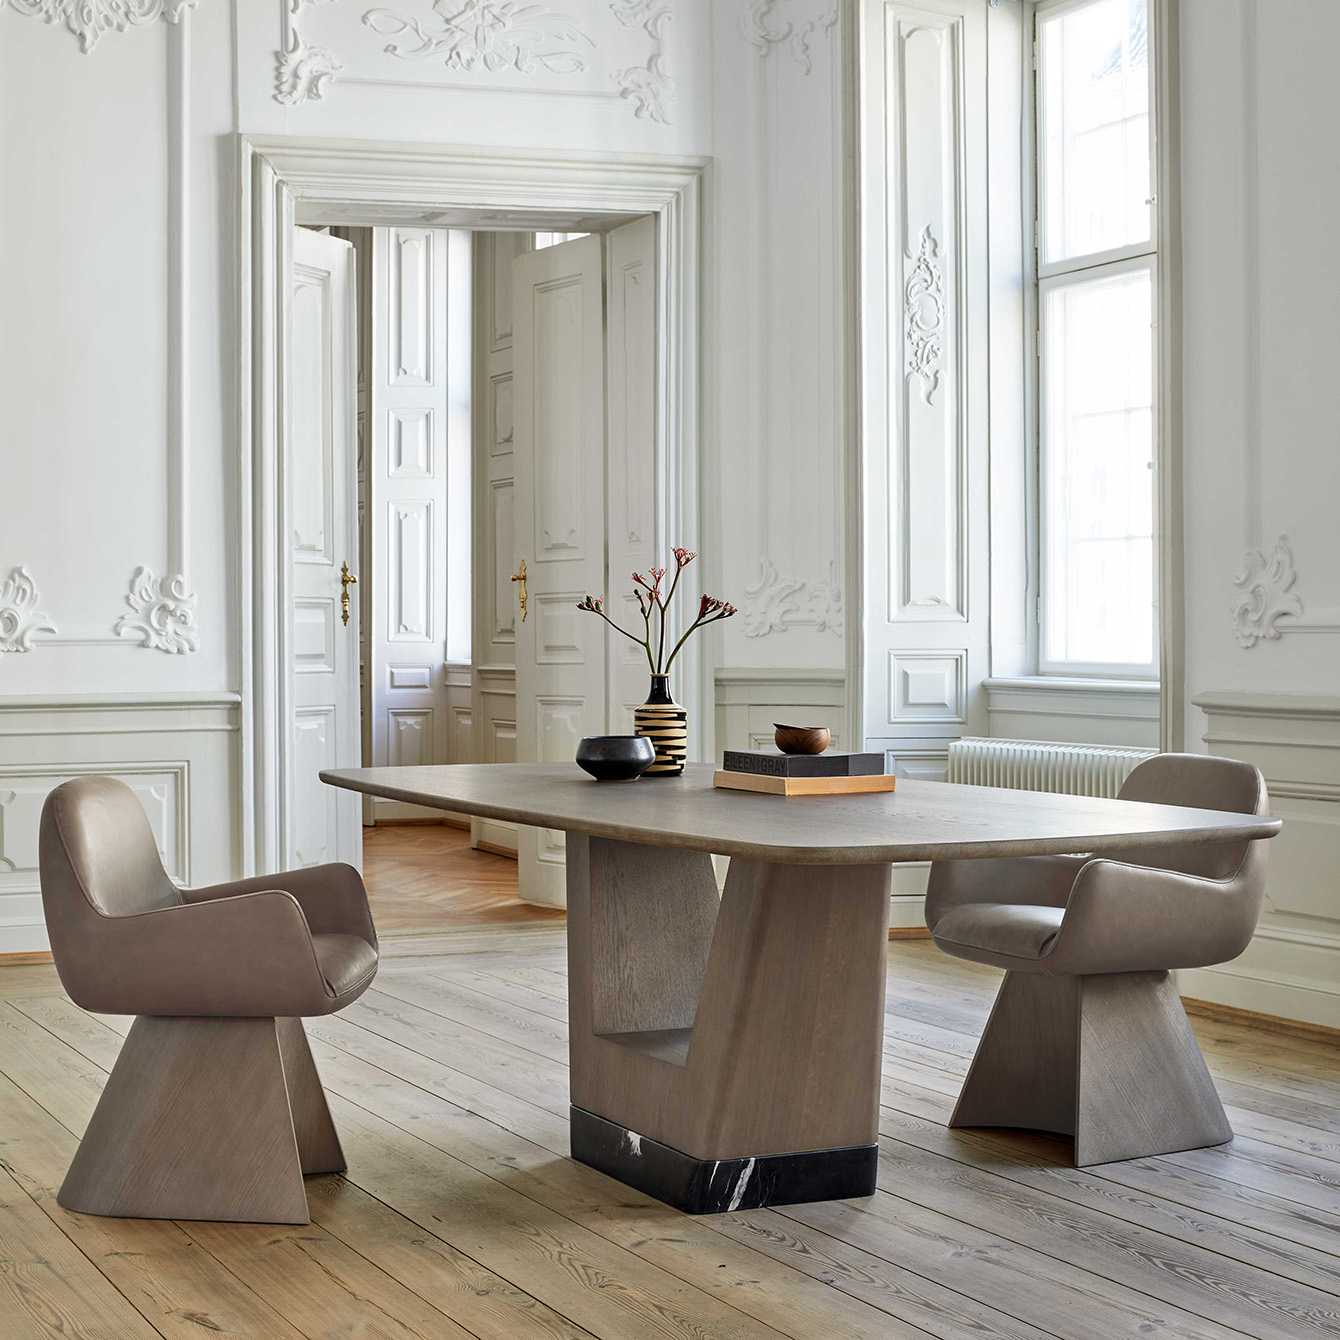 Contemporary dinning table in a classic home architecture